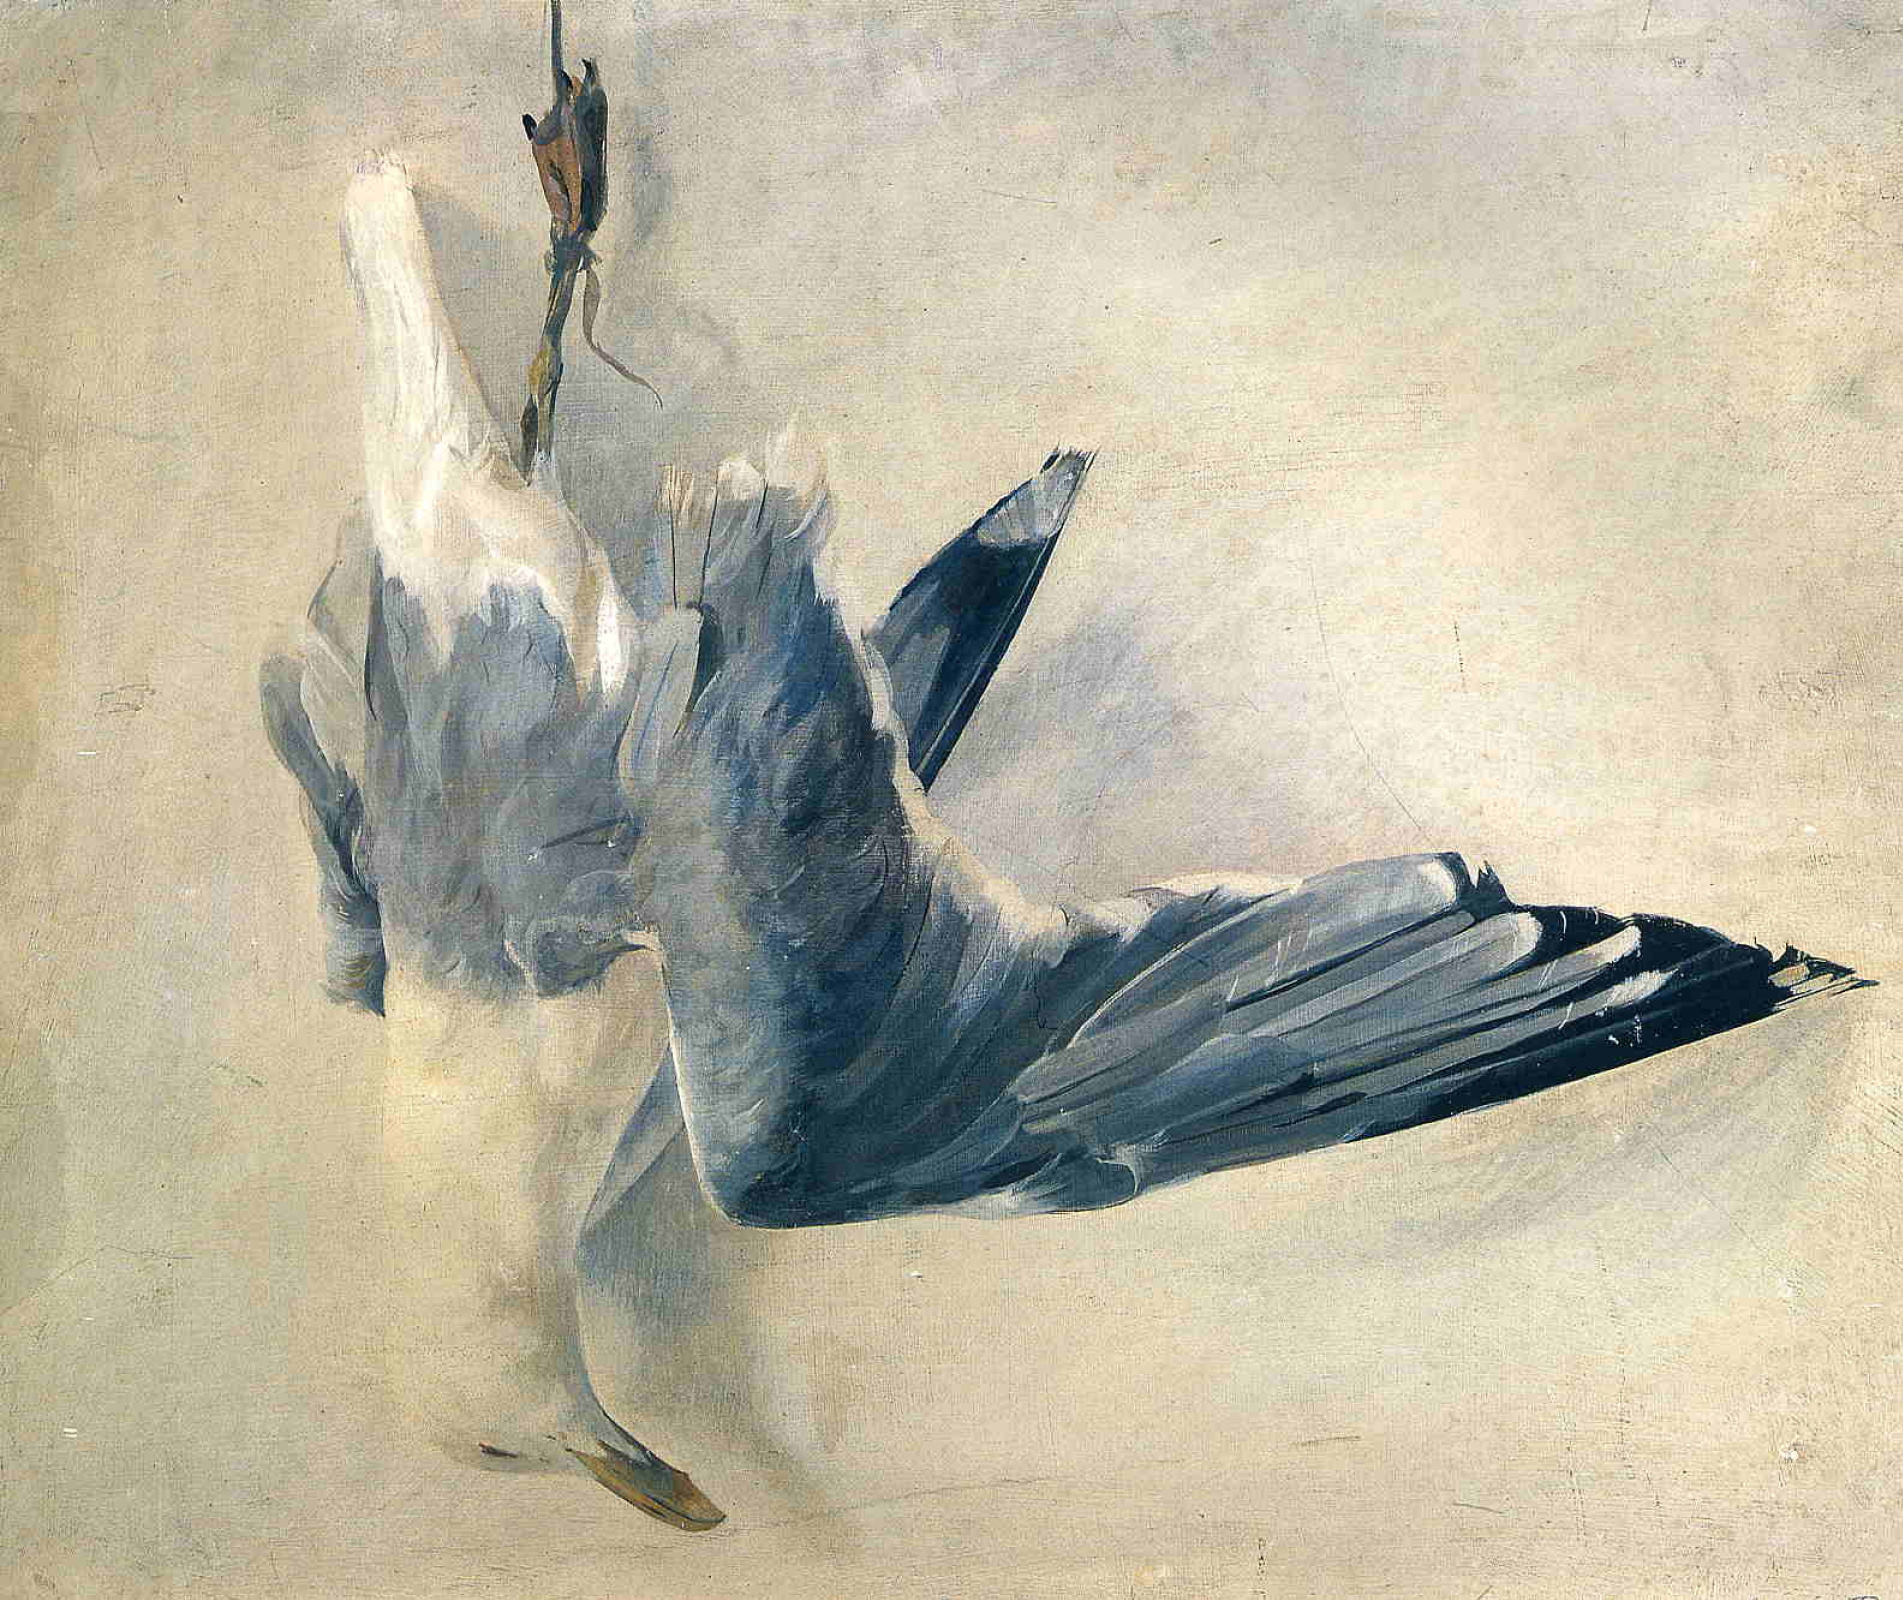 Works by Andrew Wyeth before 1940